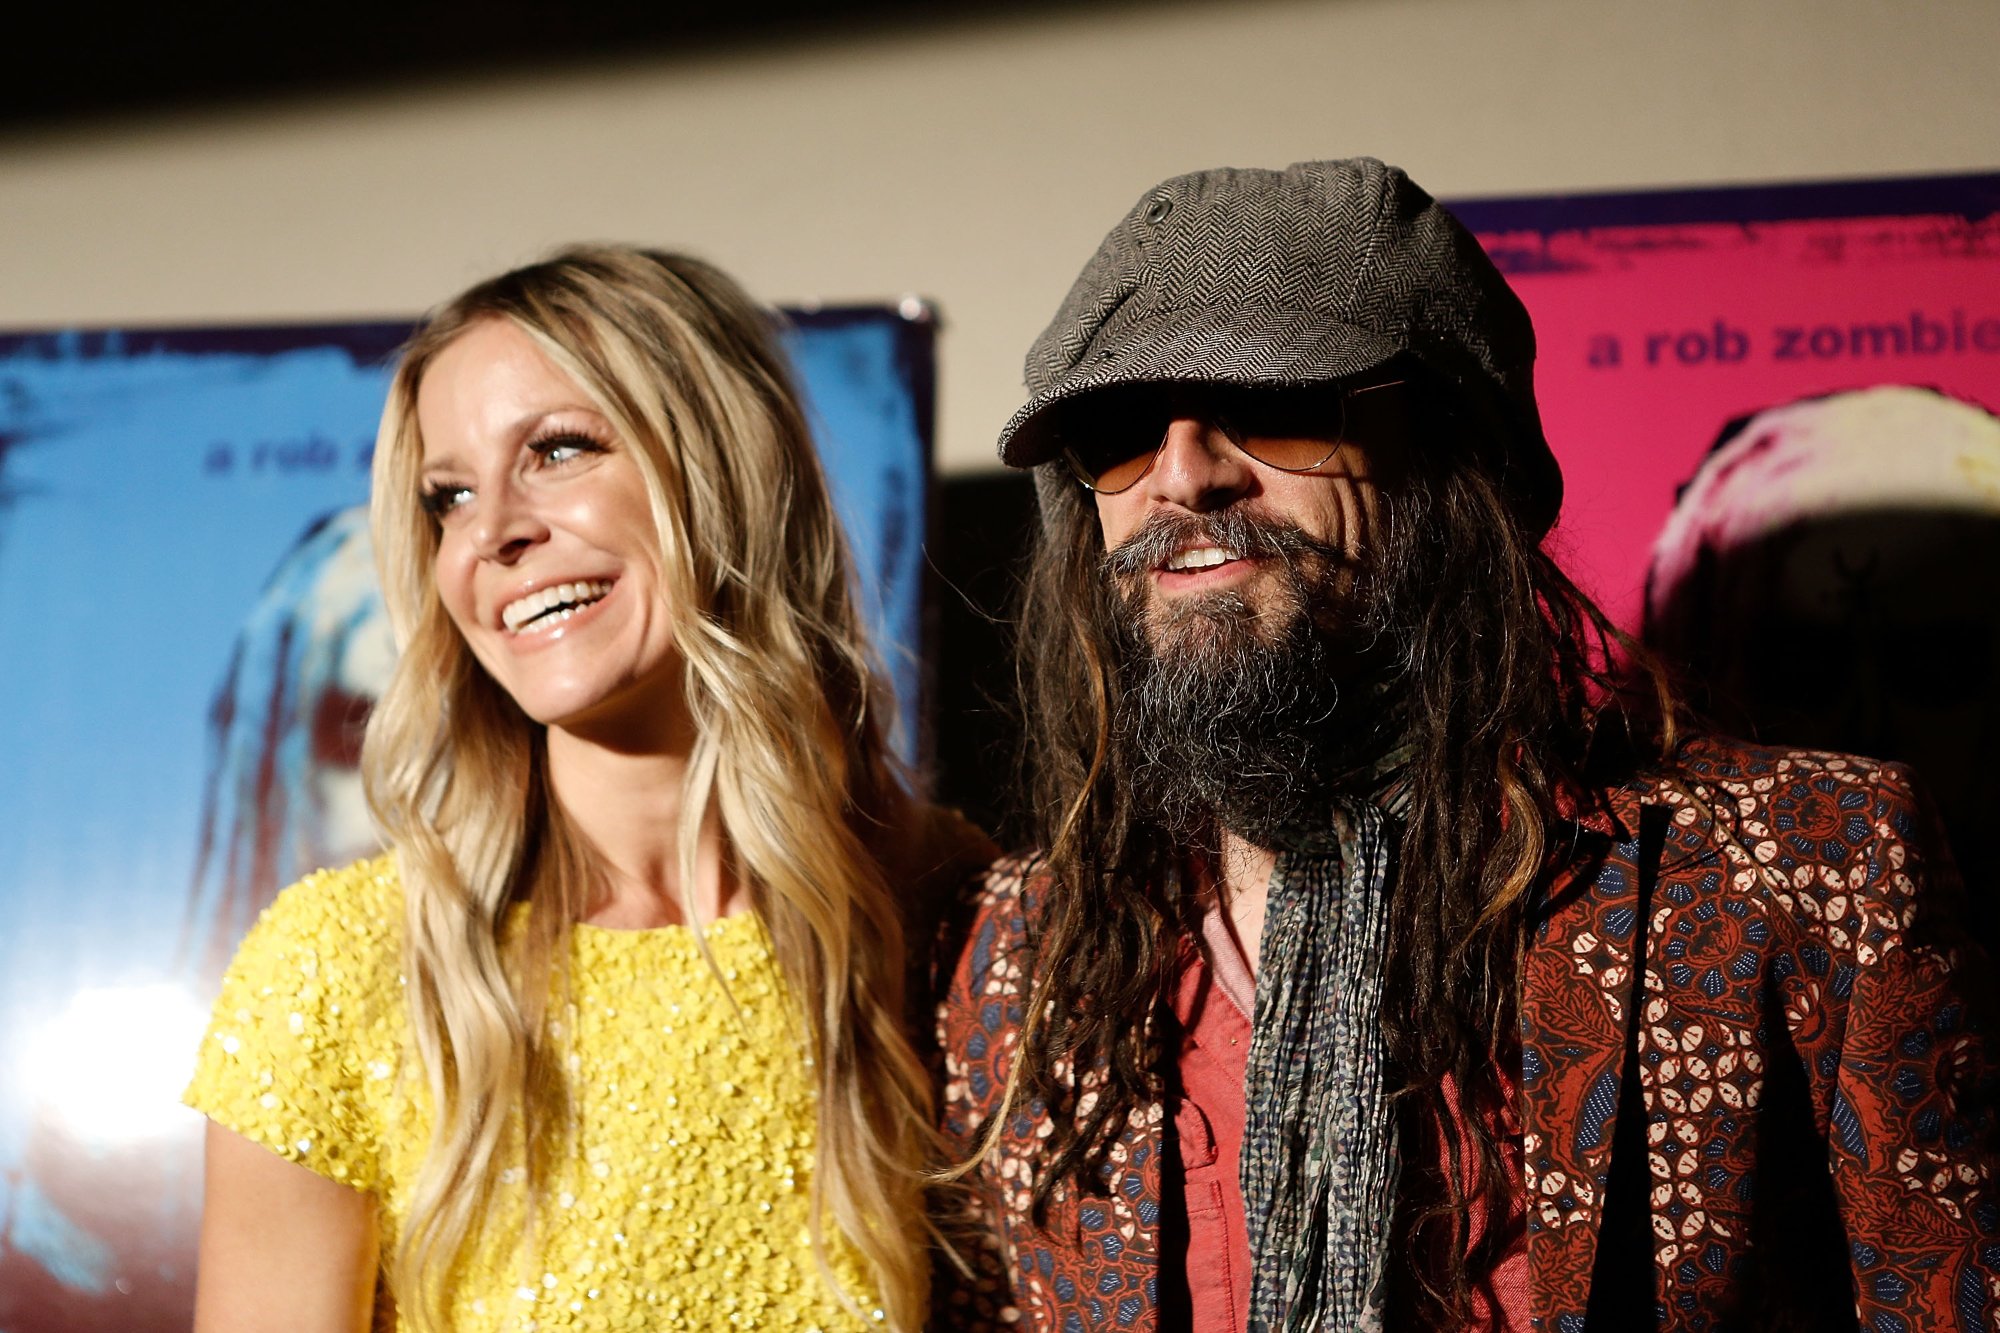 'The Munsters' actor Sheri Moon Zombie and director Rob Zombie, whose trailer is getting slammed. They're smiling for press in front of 'Lords of Salem' poster.